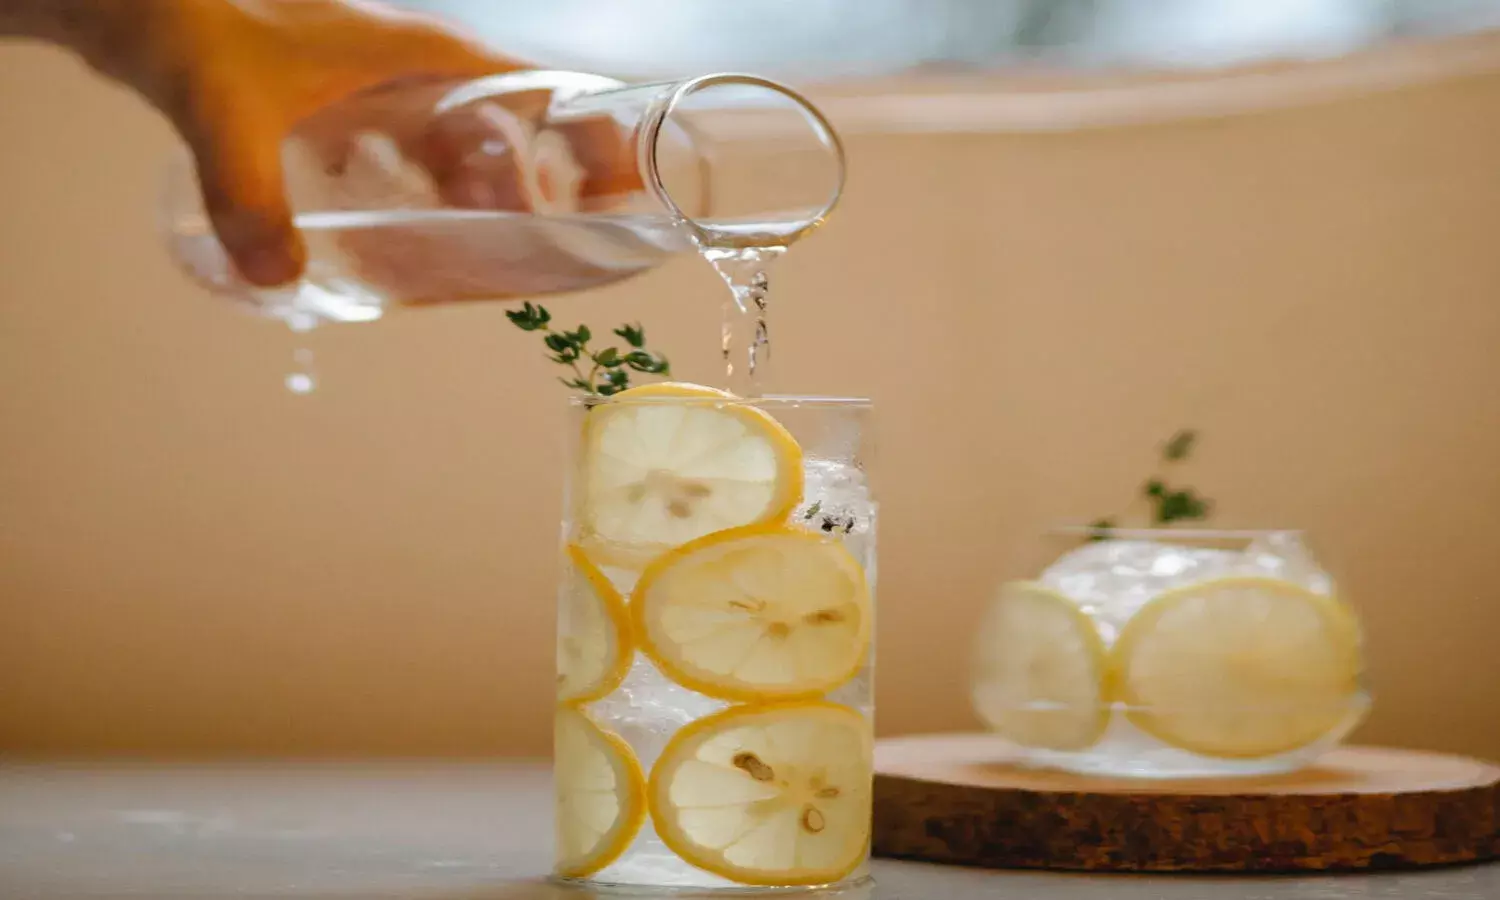 Heres why you should STOP drinking lemon water daily